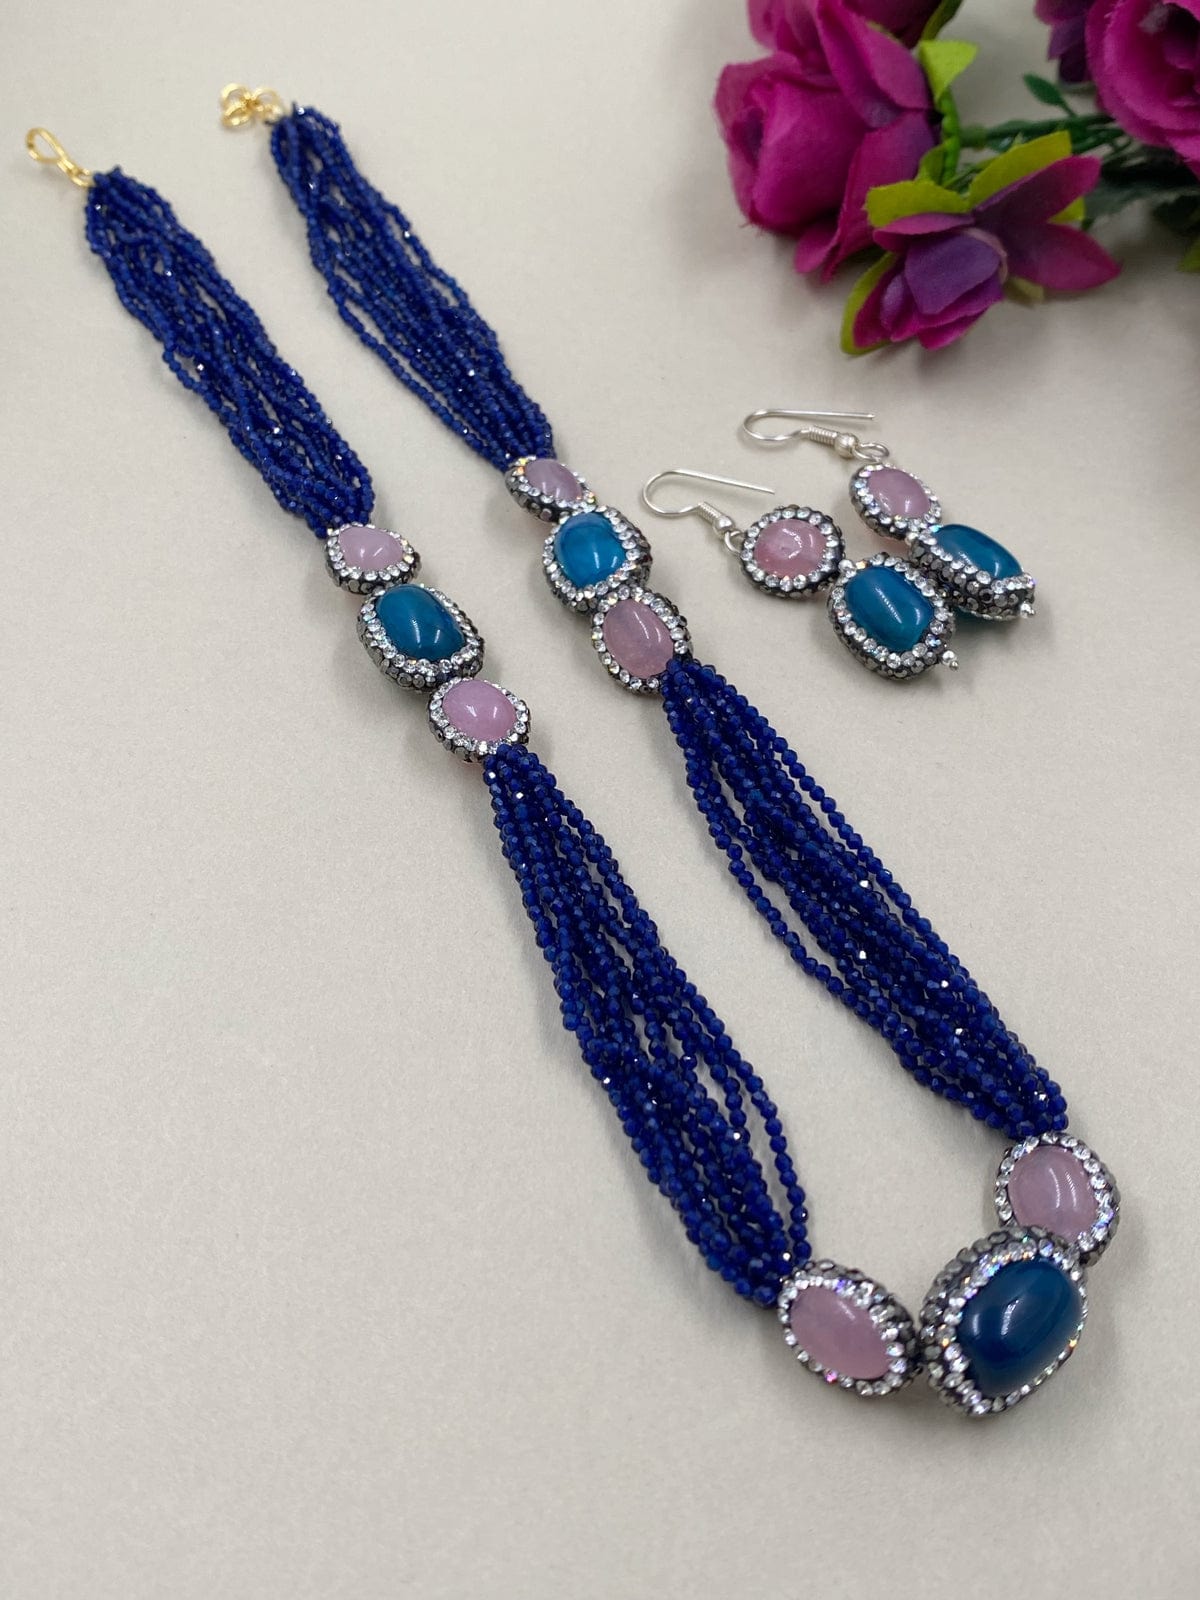 Cobalt Blue with Aventurina Murano Glass Beaded Necklace 26 Inches with 1  1/4 Inch Extender, Silver Tone Clasp and Murano Tag